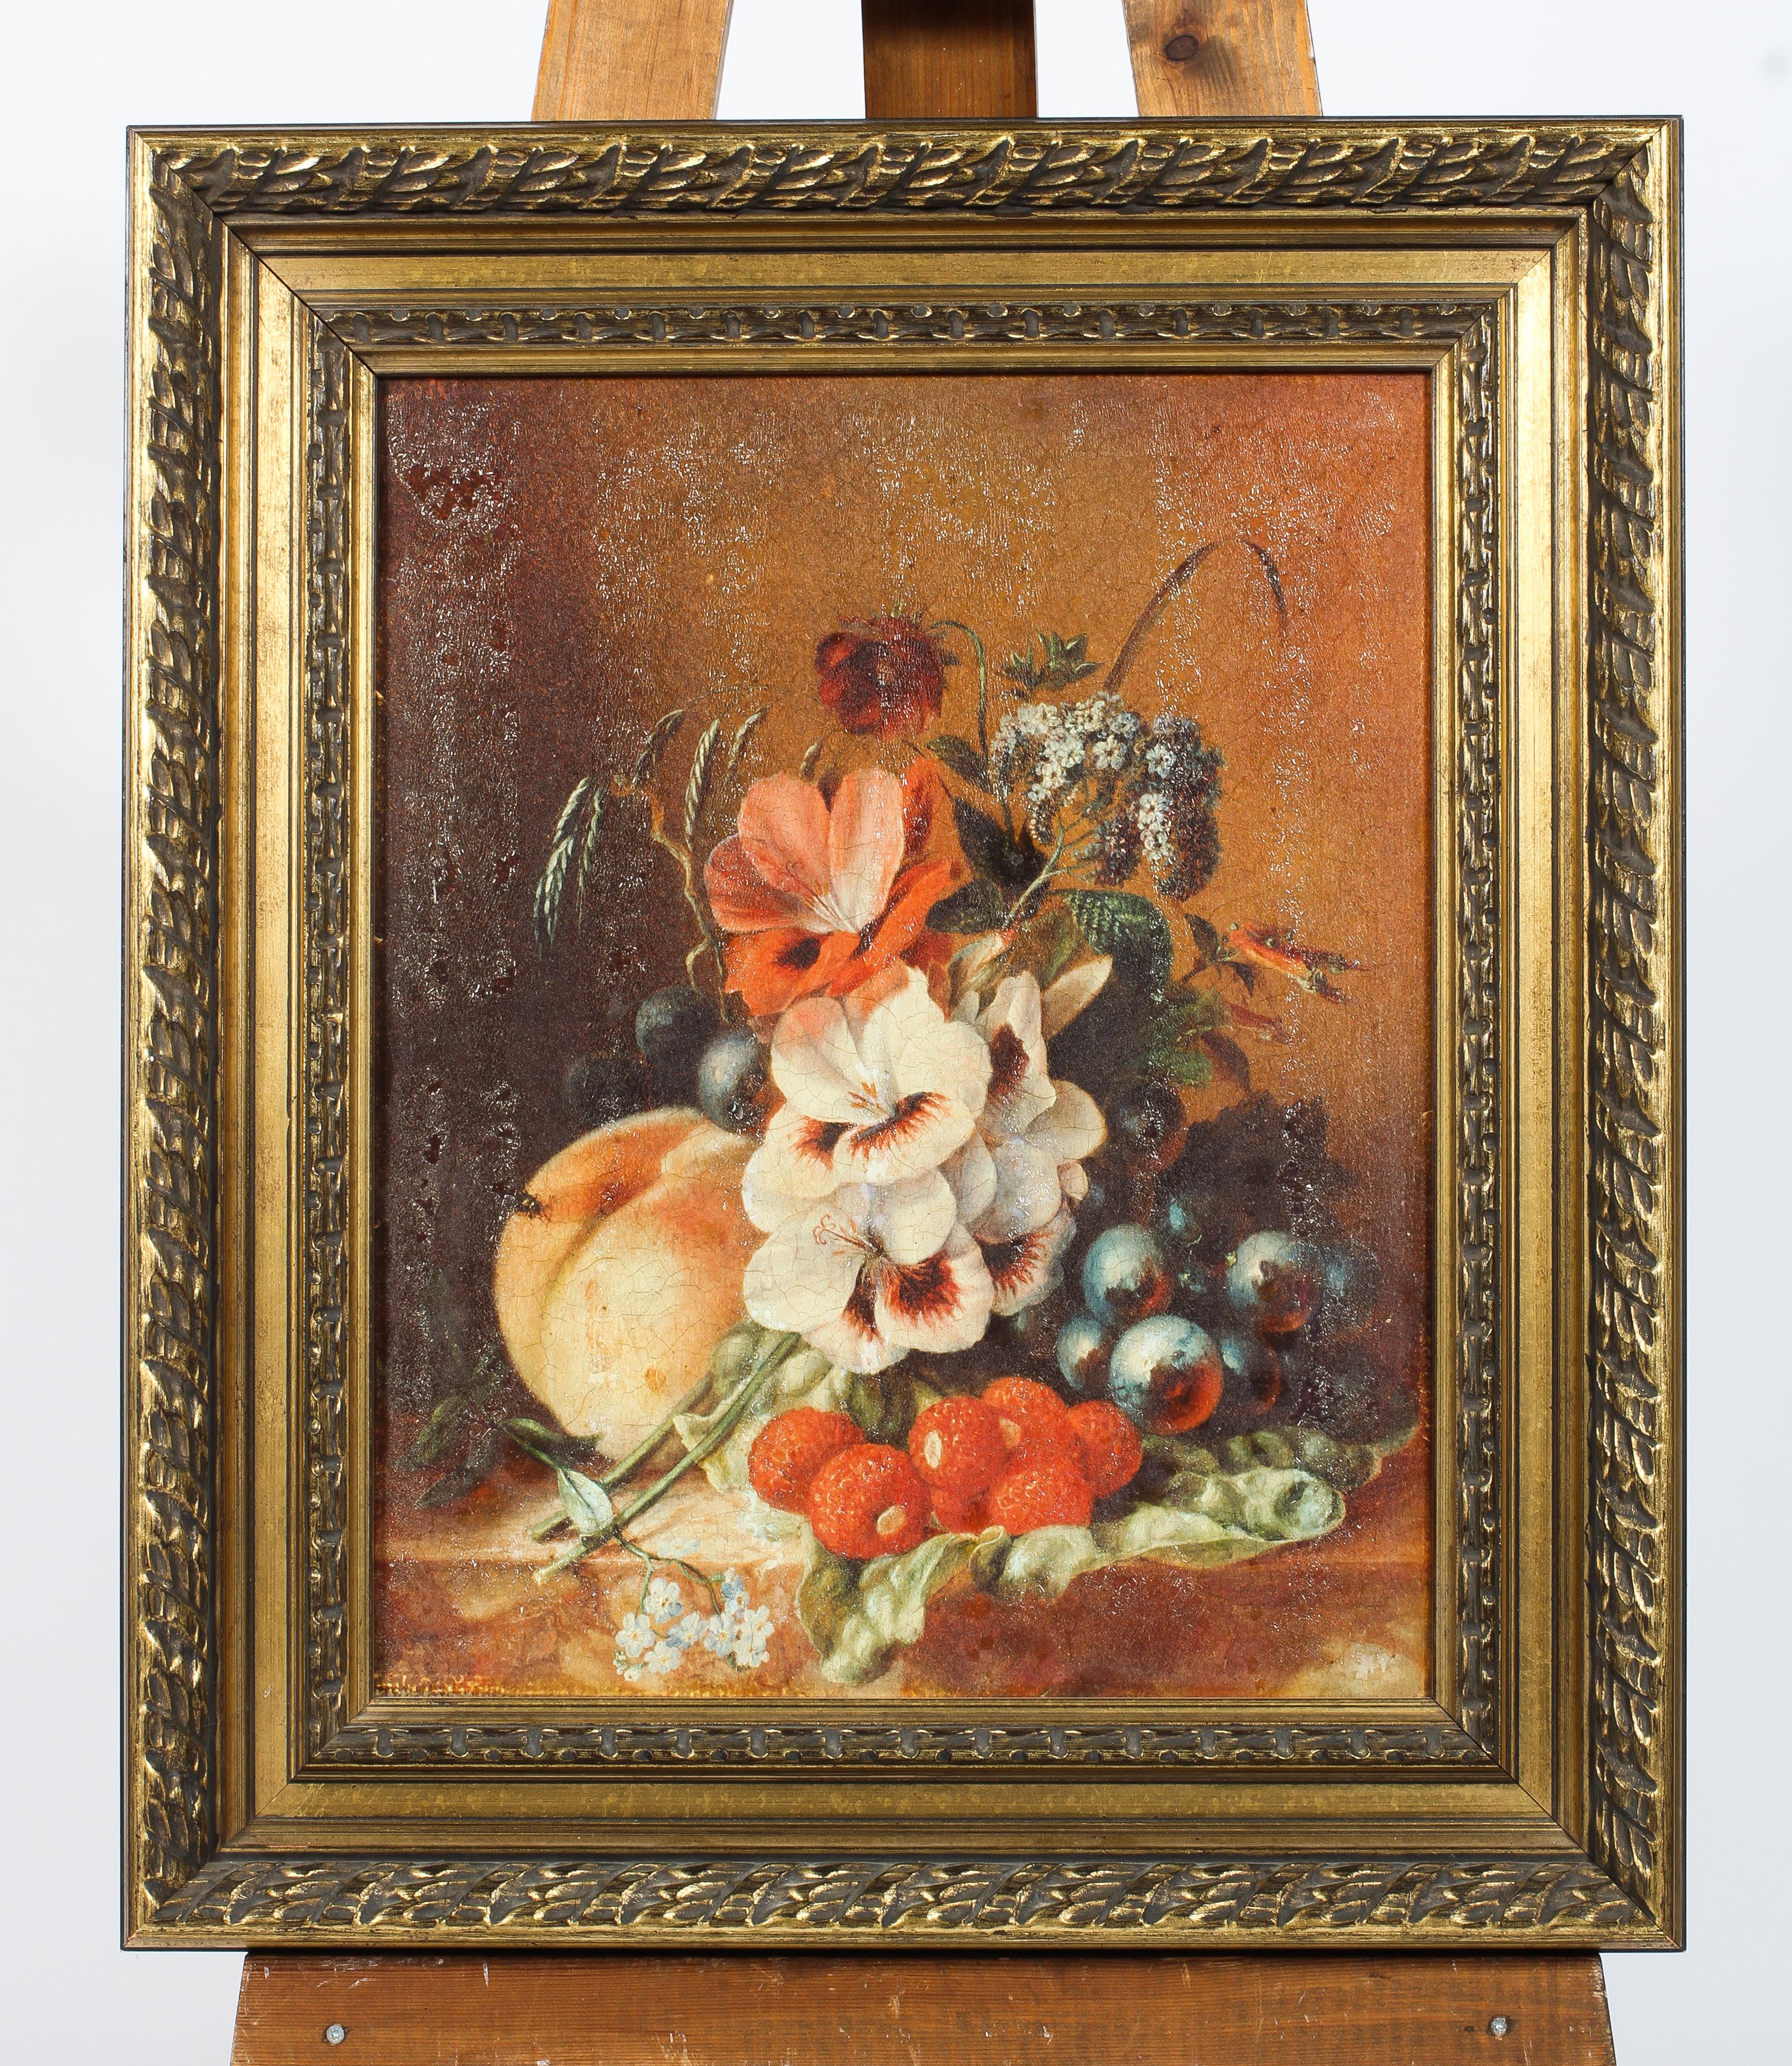 A 20th century oil on canvas, depicting a still life of fruit and flowers, 65cm x 56cm, - Image 2 of 3